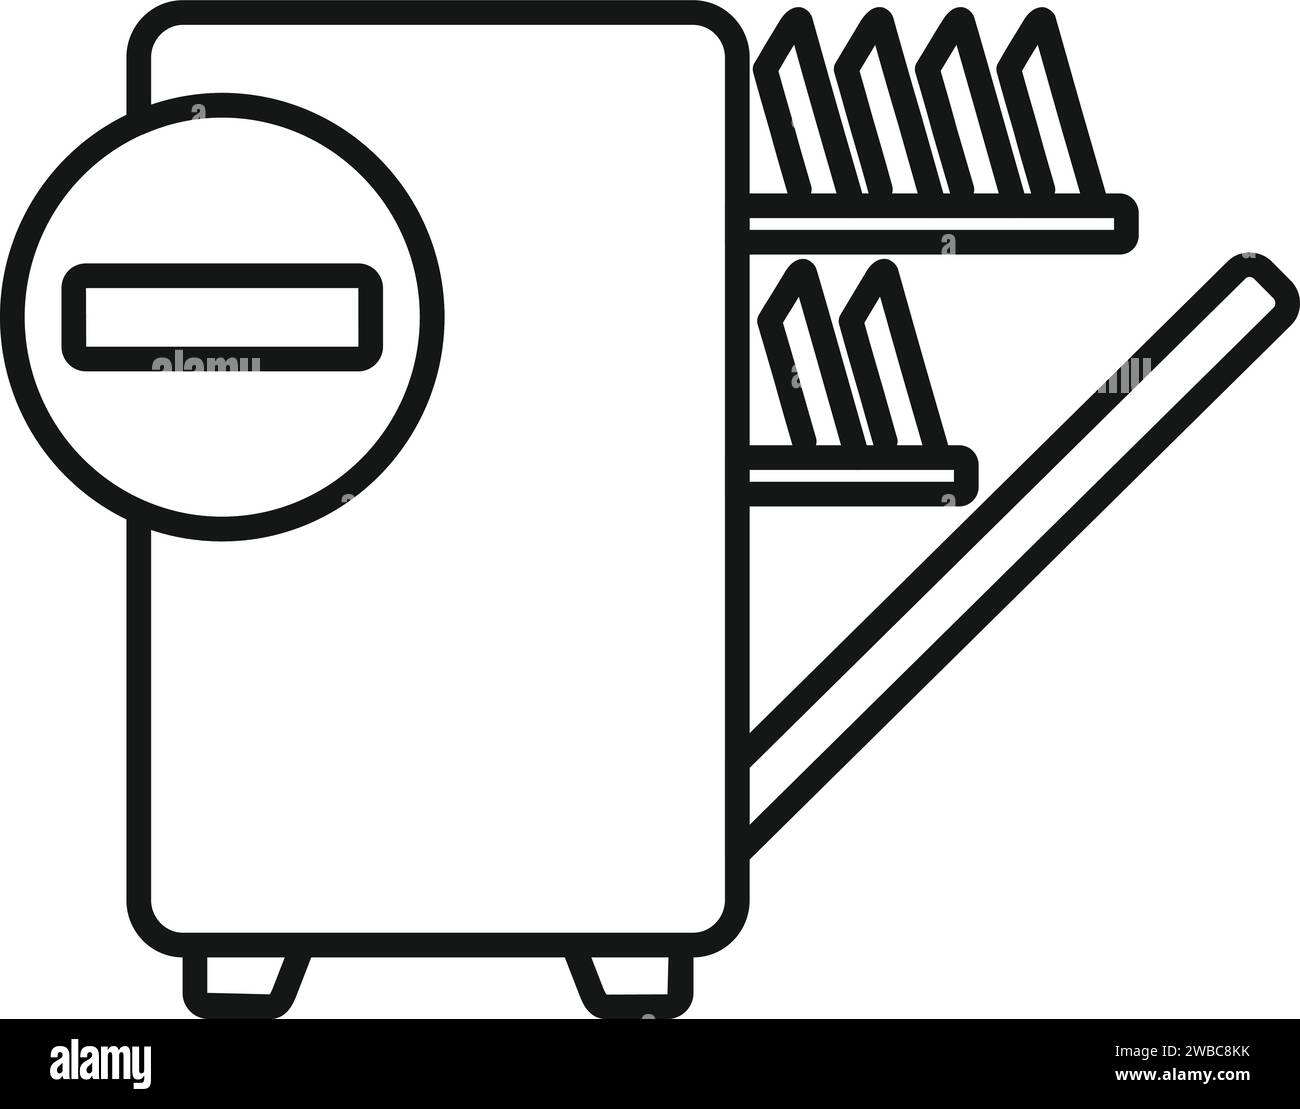 Broken home appliance icon outline vector. Water dishwasher. Home failure Stock Vector